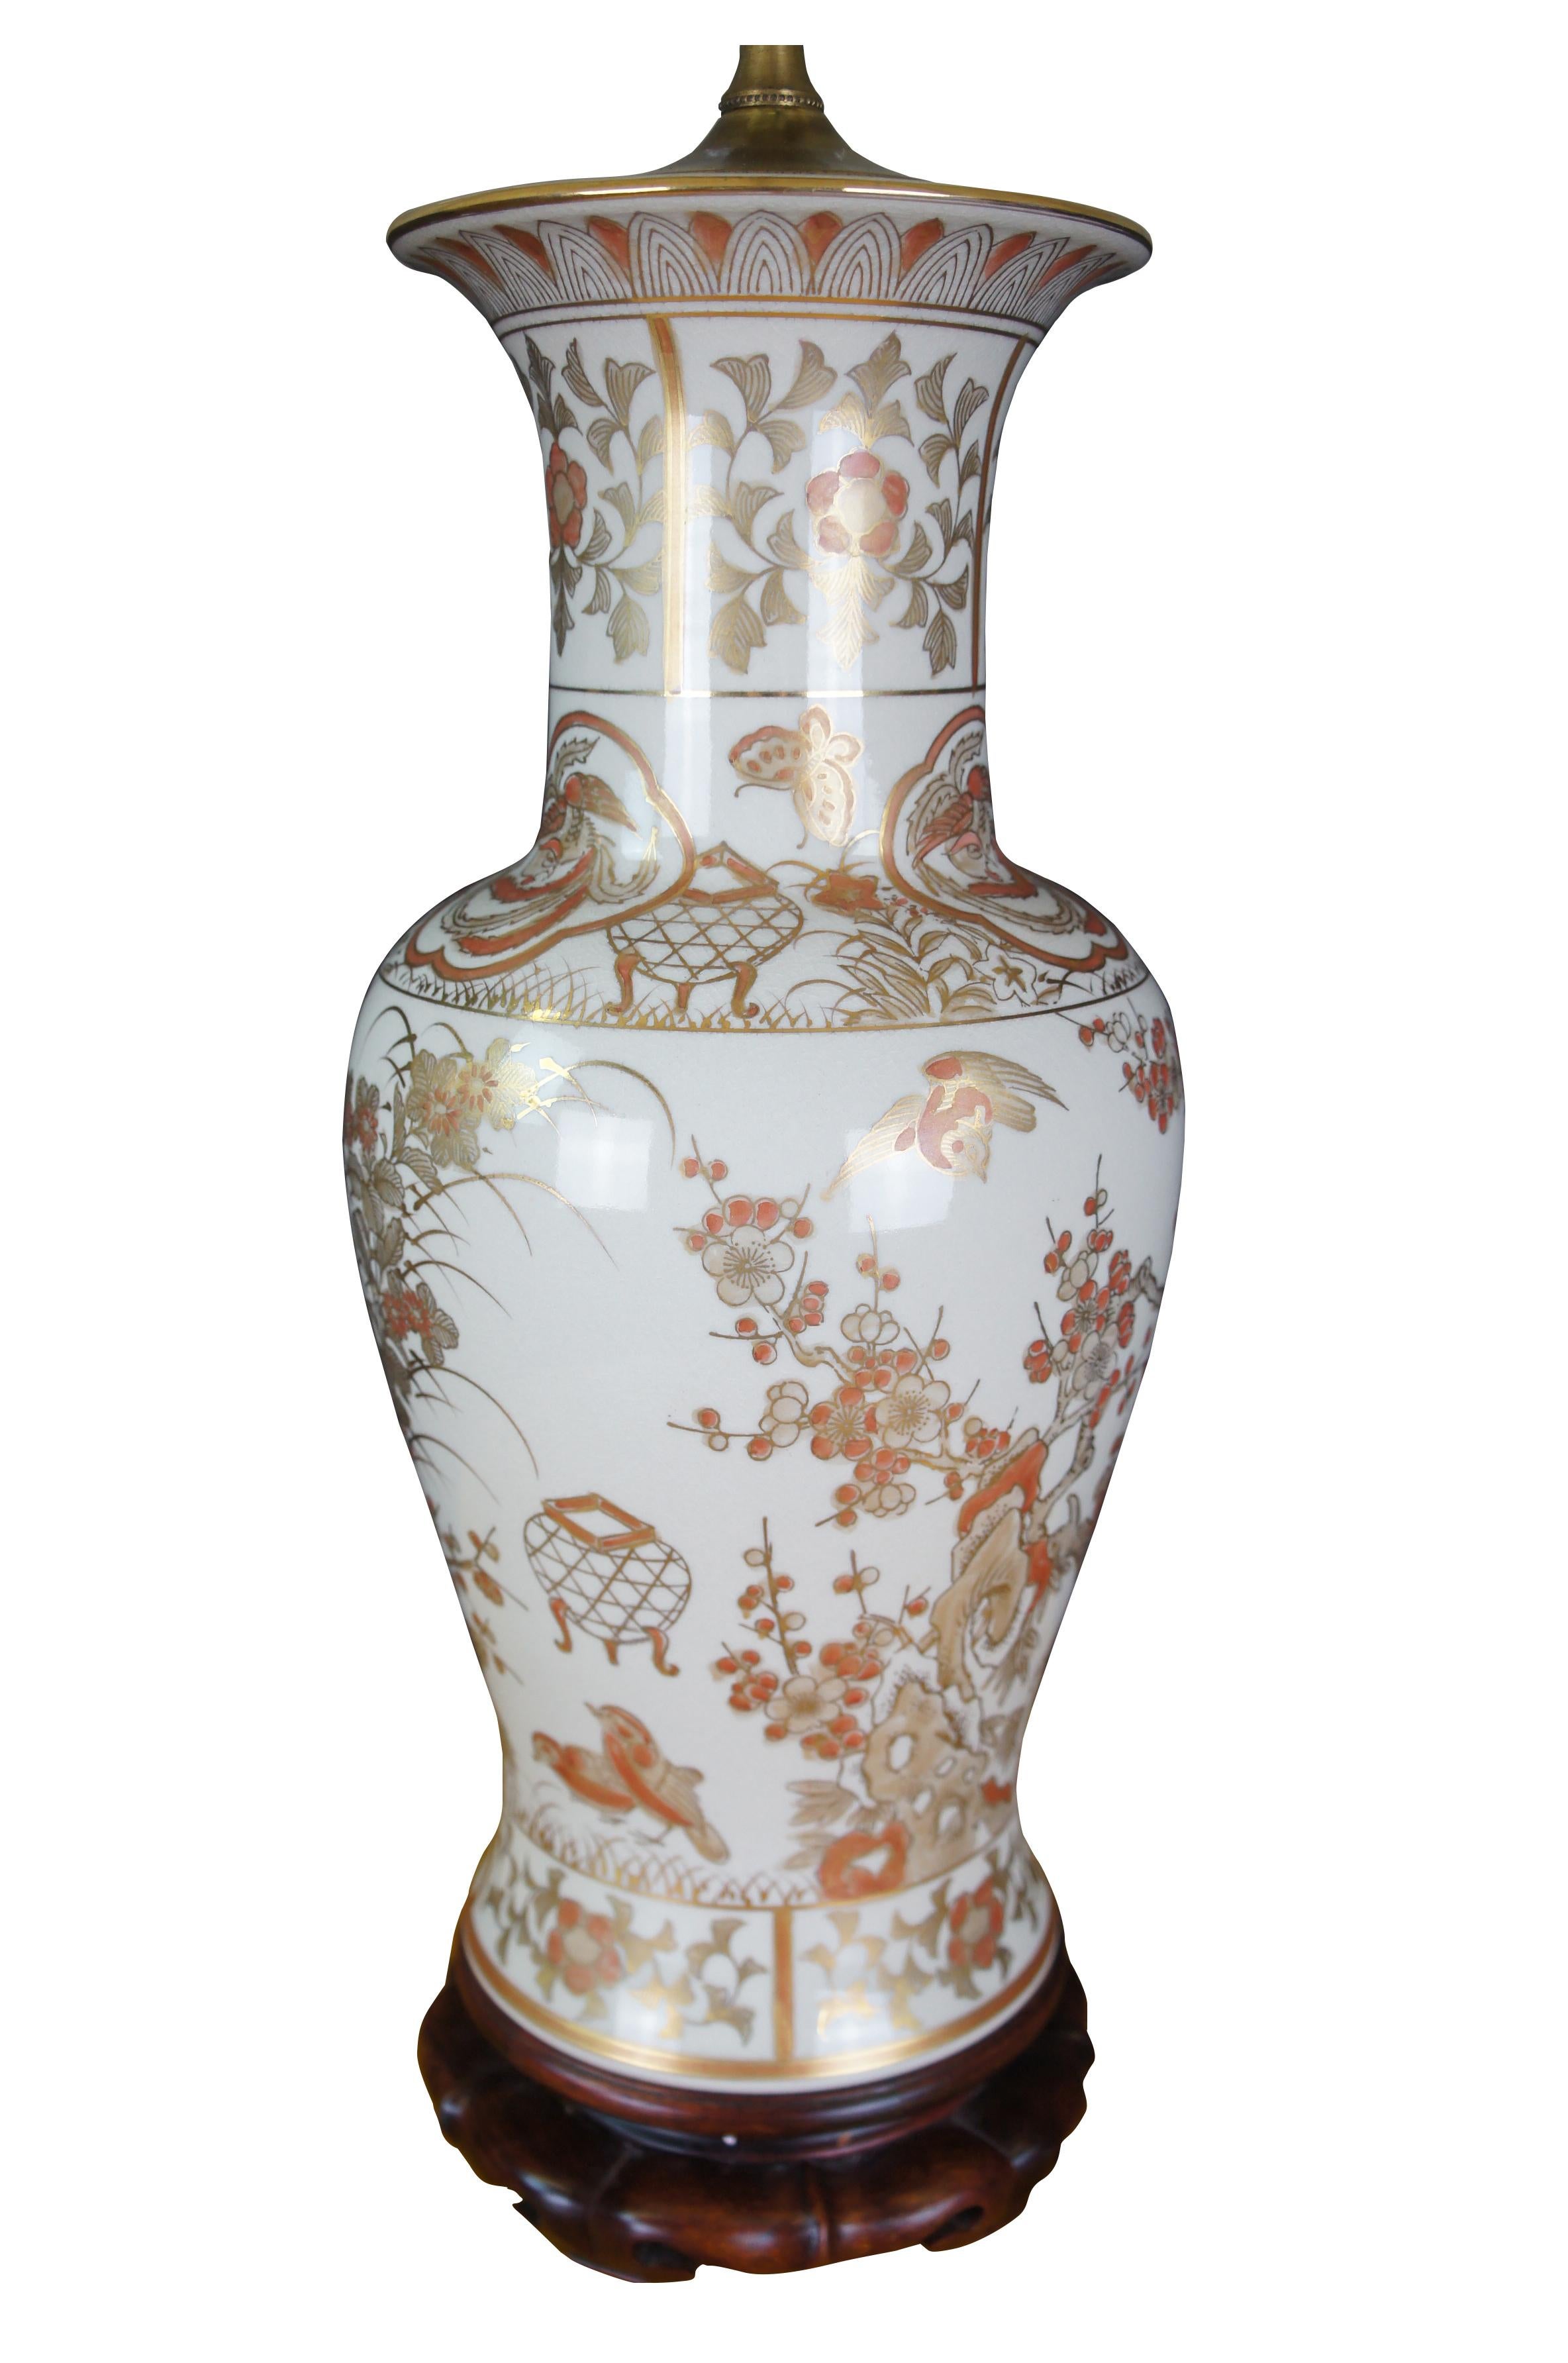 A Chinese porcelain table urn shaped table lamp. White with gold and orange colors. Features cherry blossoms and birds. The lamp is mounted to a wooden base. Features a jade finial and new shade. 

Measures: 7